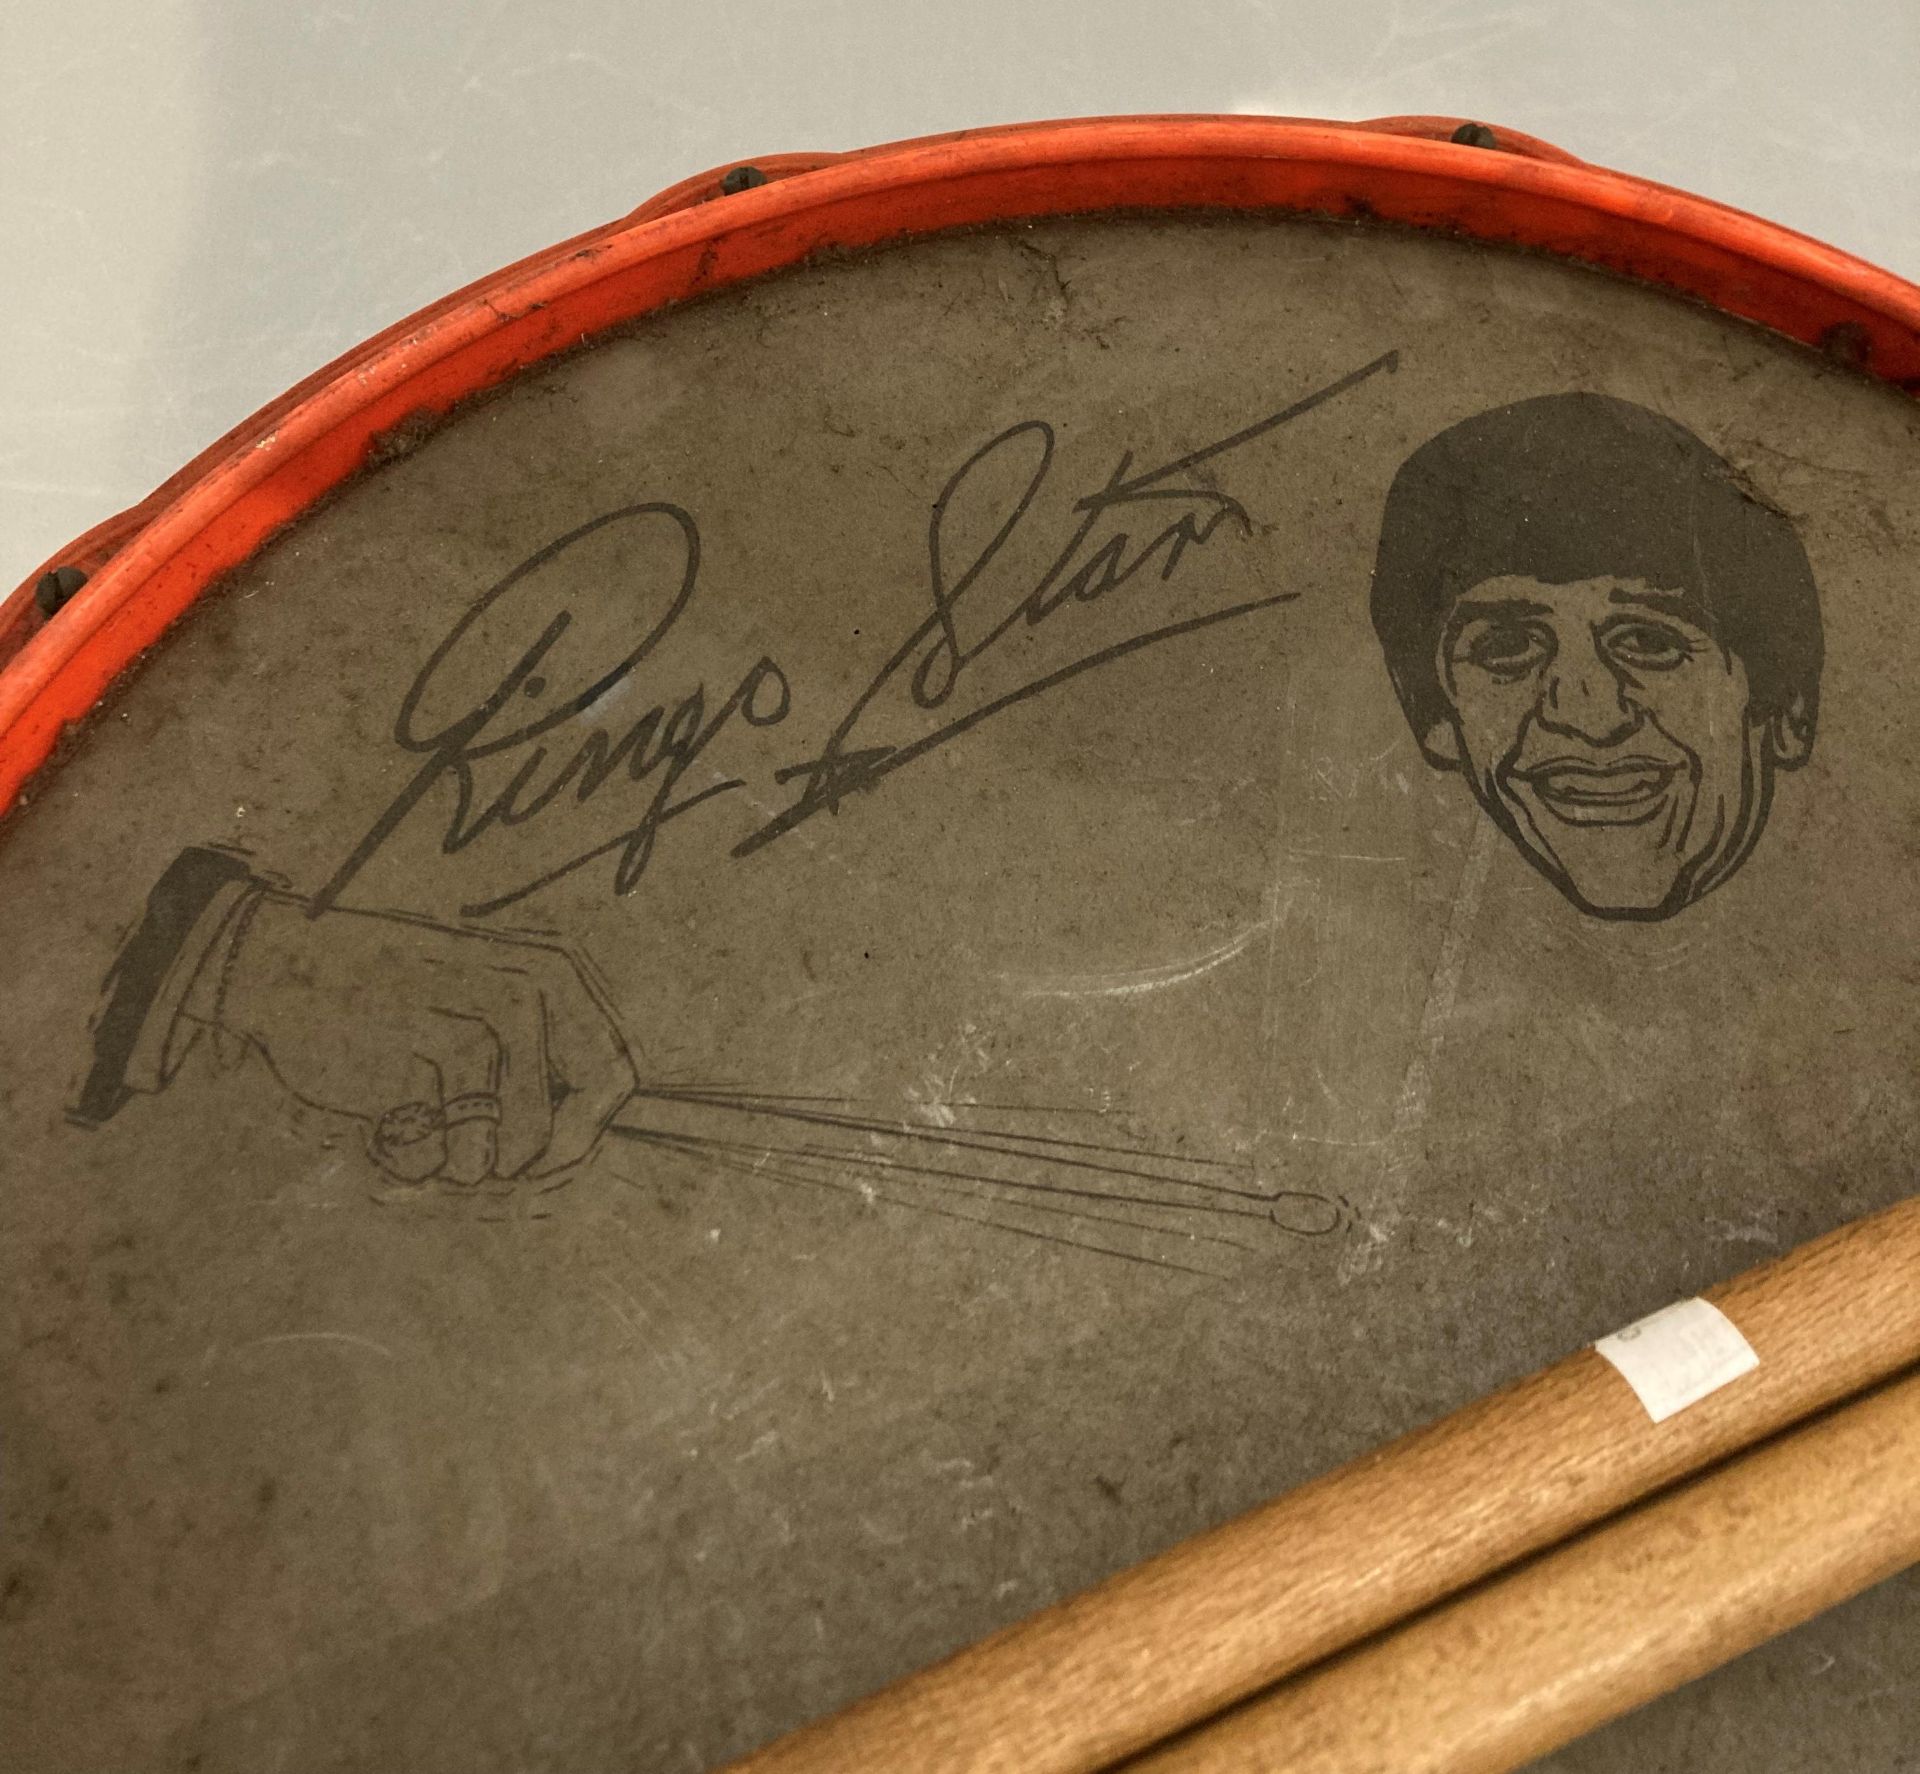 Ringo Star New Beat plastic snare drum with two wooden drum sticks by Selco (Saleroom location: S3) - Image 2 of 4